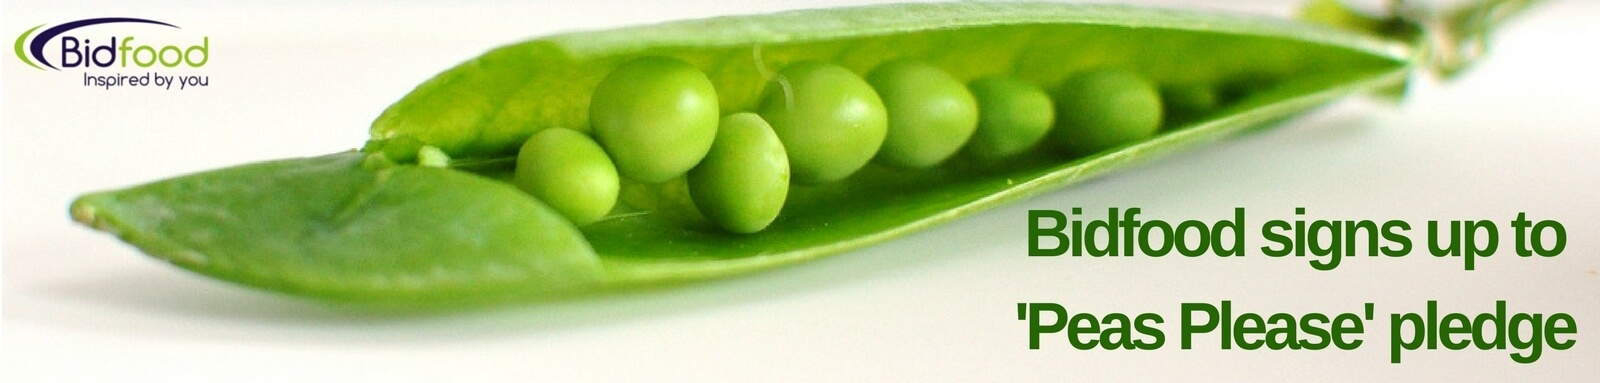 Bidfood signs up to ‘Peas Please’ pledge